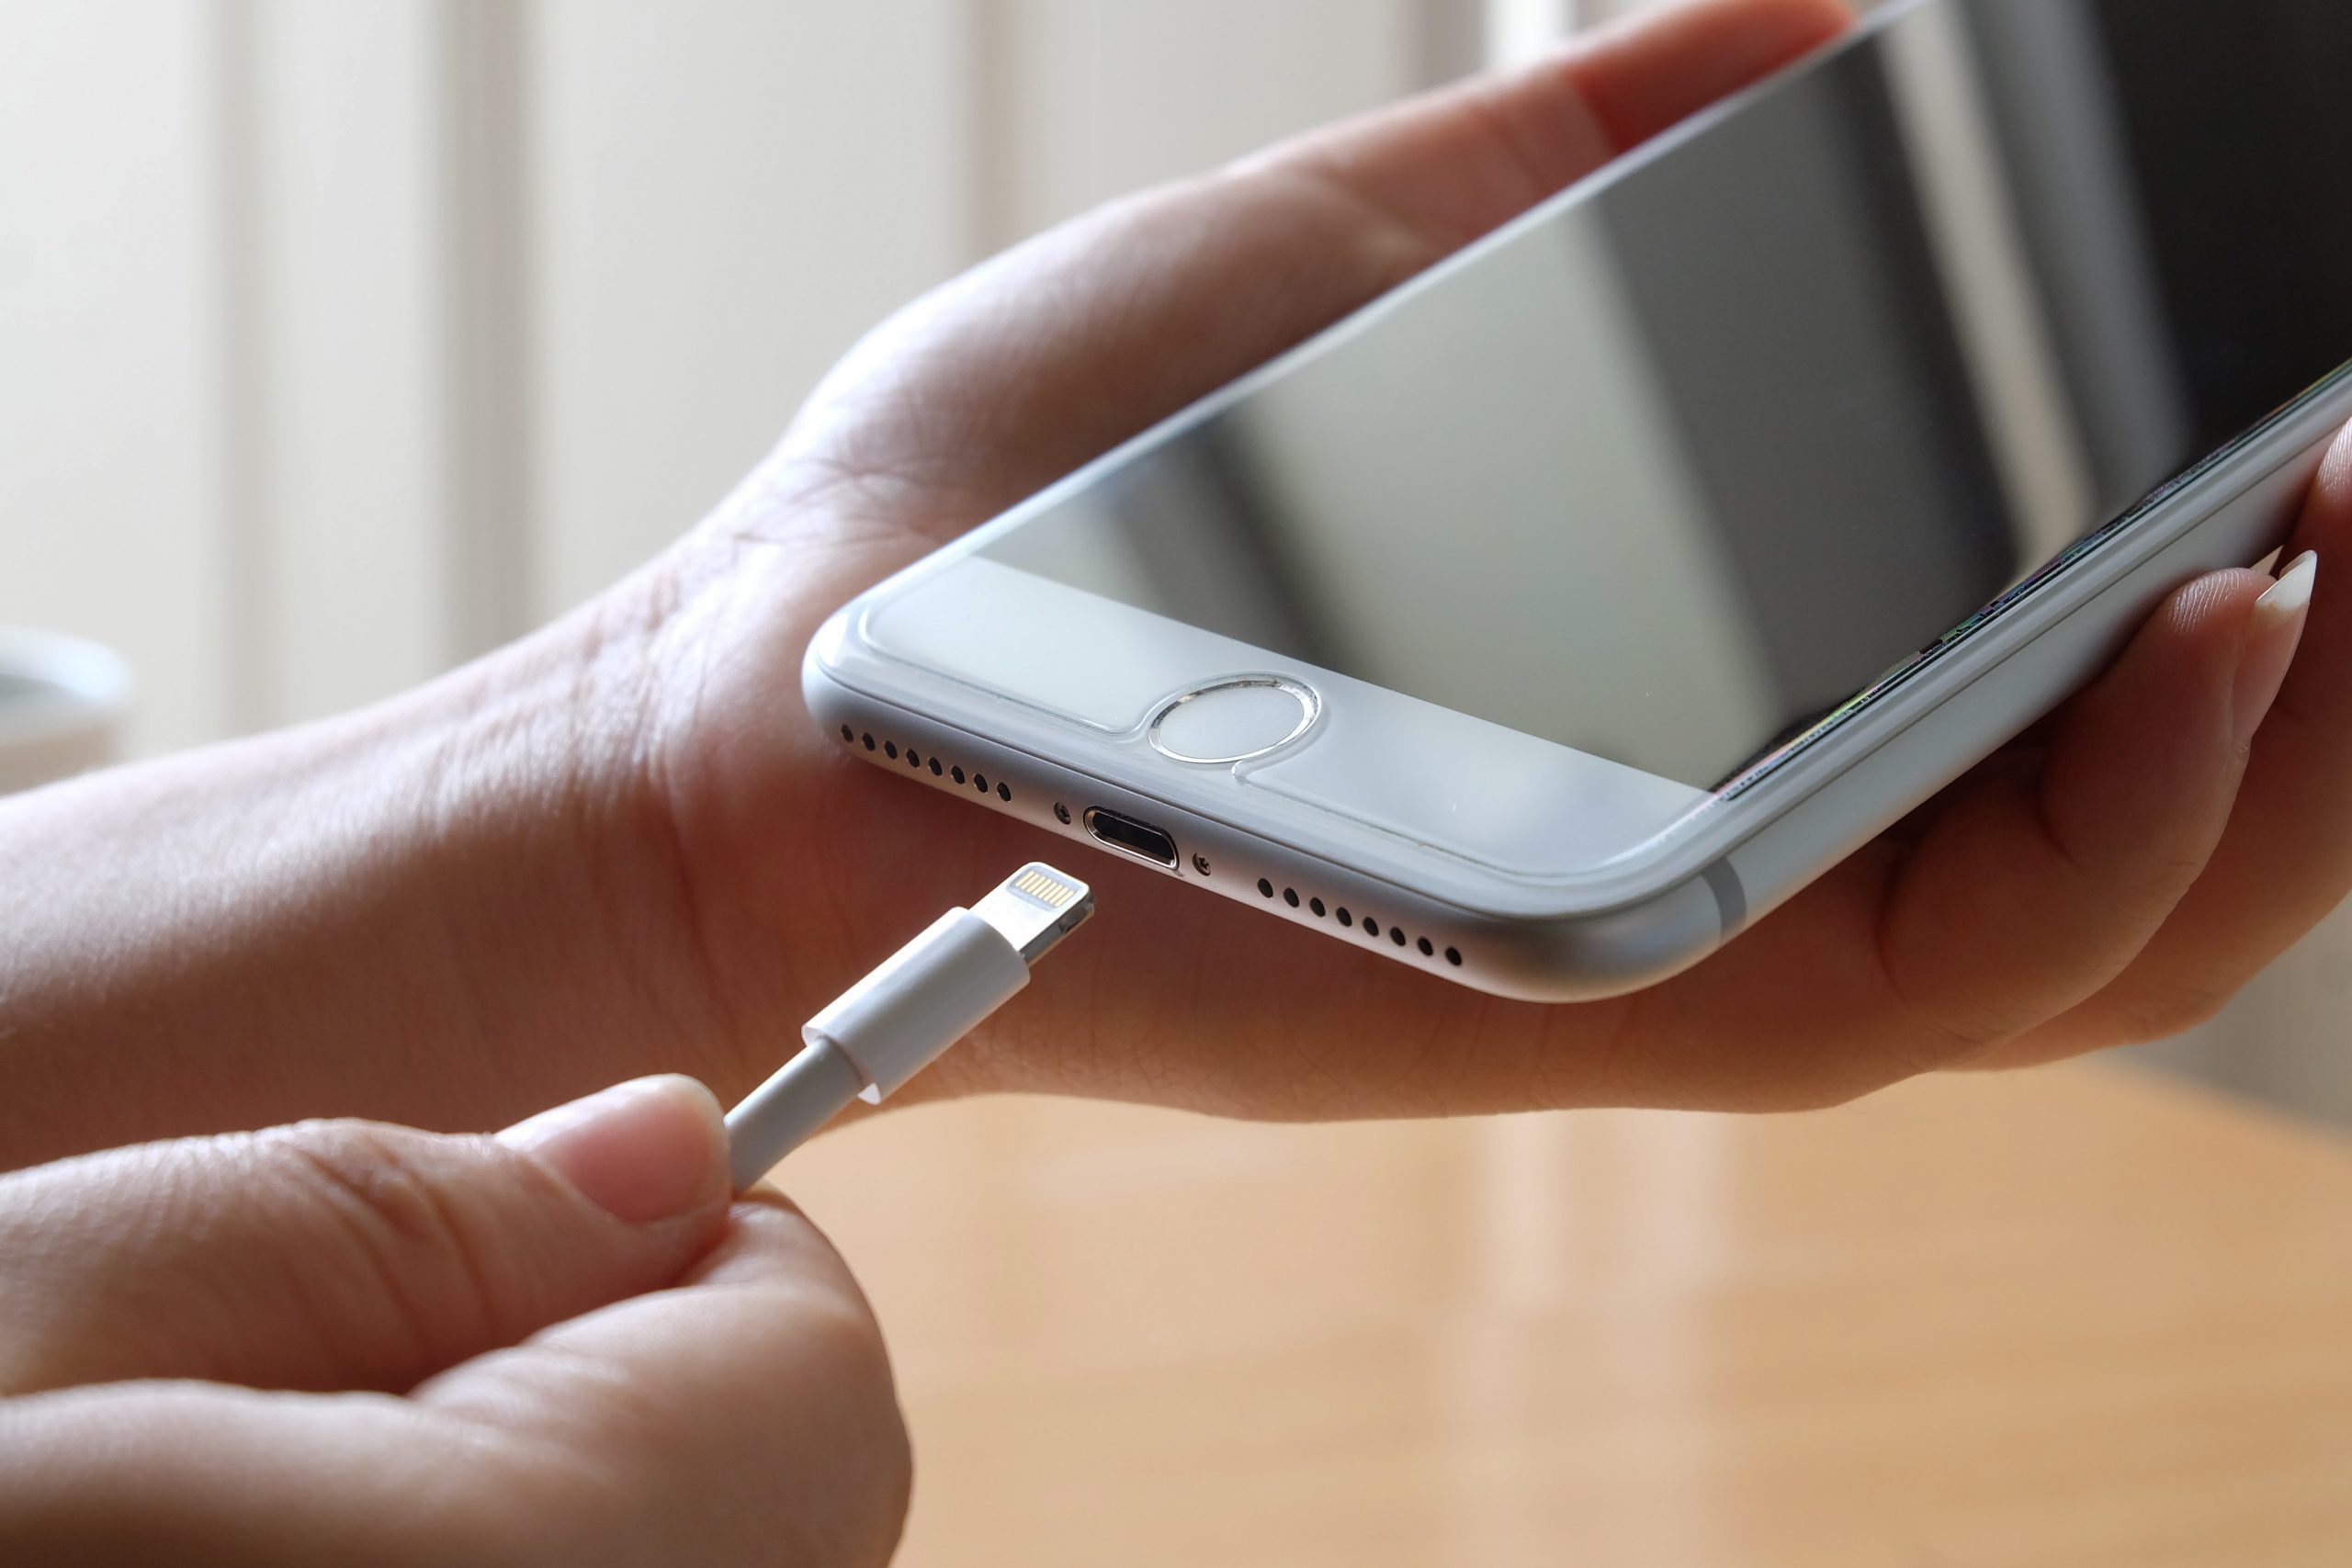 Places You Should Never Charge Your Phone | Reader's Digest